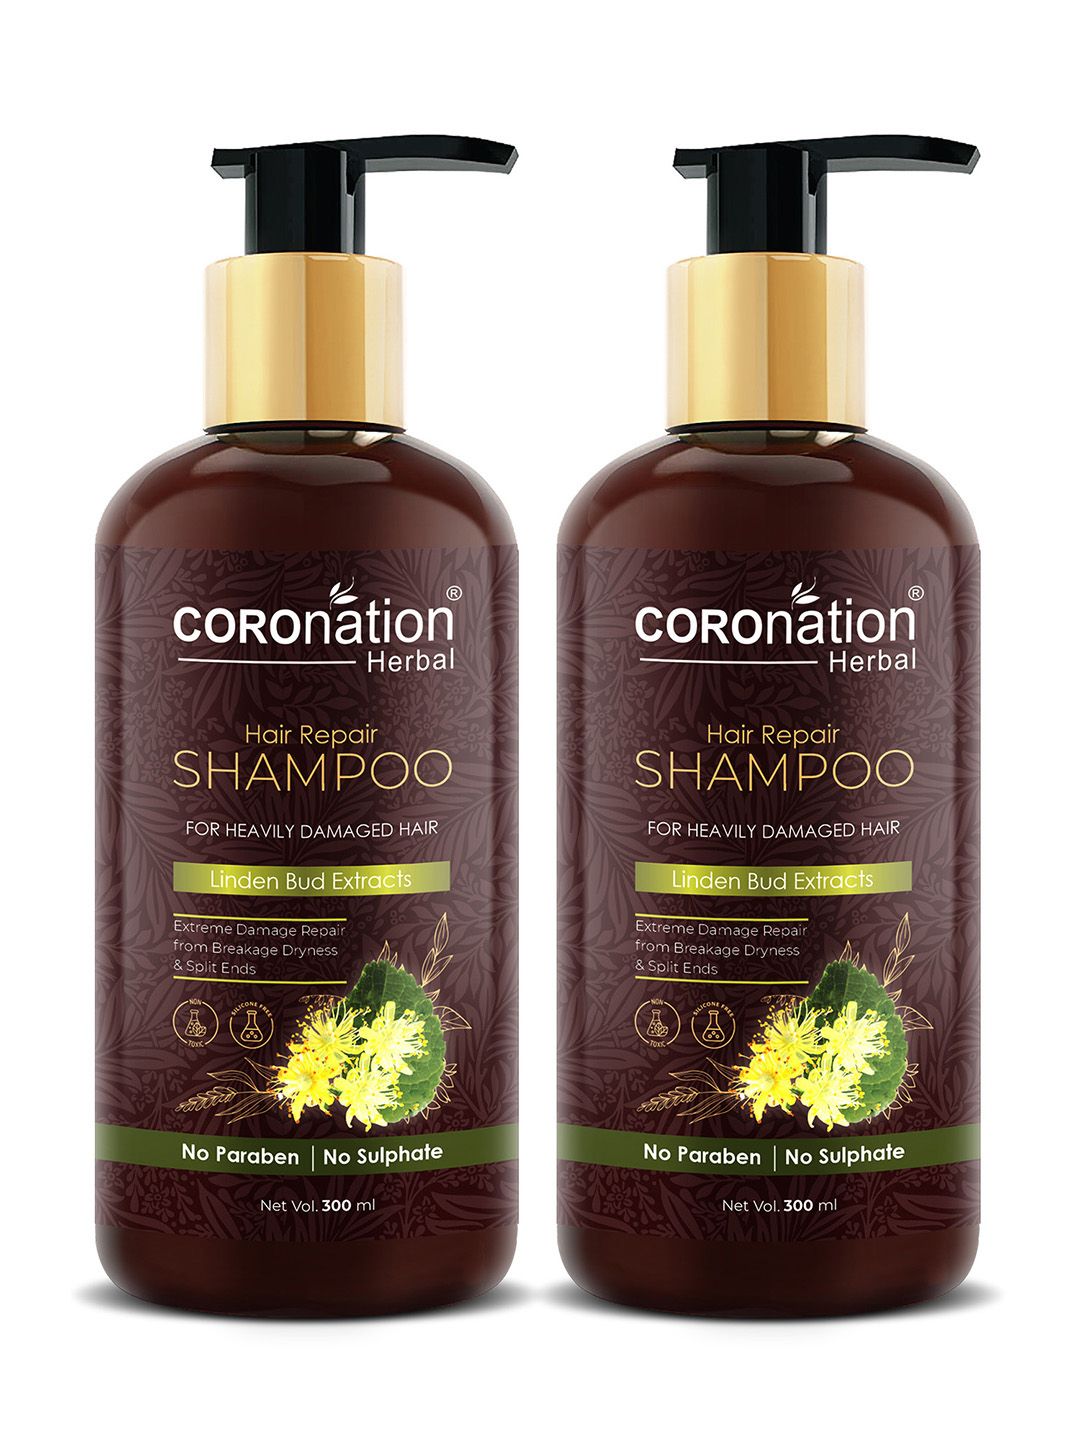 COROnation Herbal Set of 2 Linden Bud Extracts Hair Repair Shampoo 300 ml Each Price in India